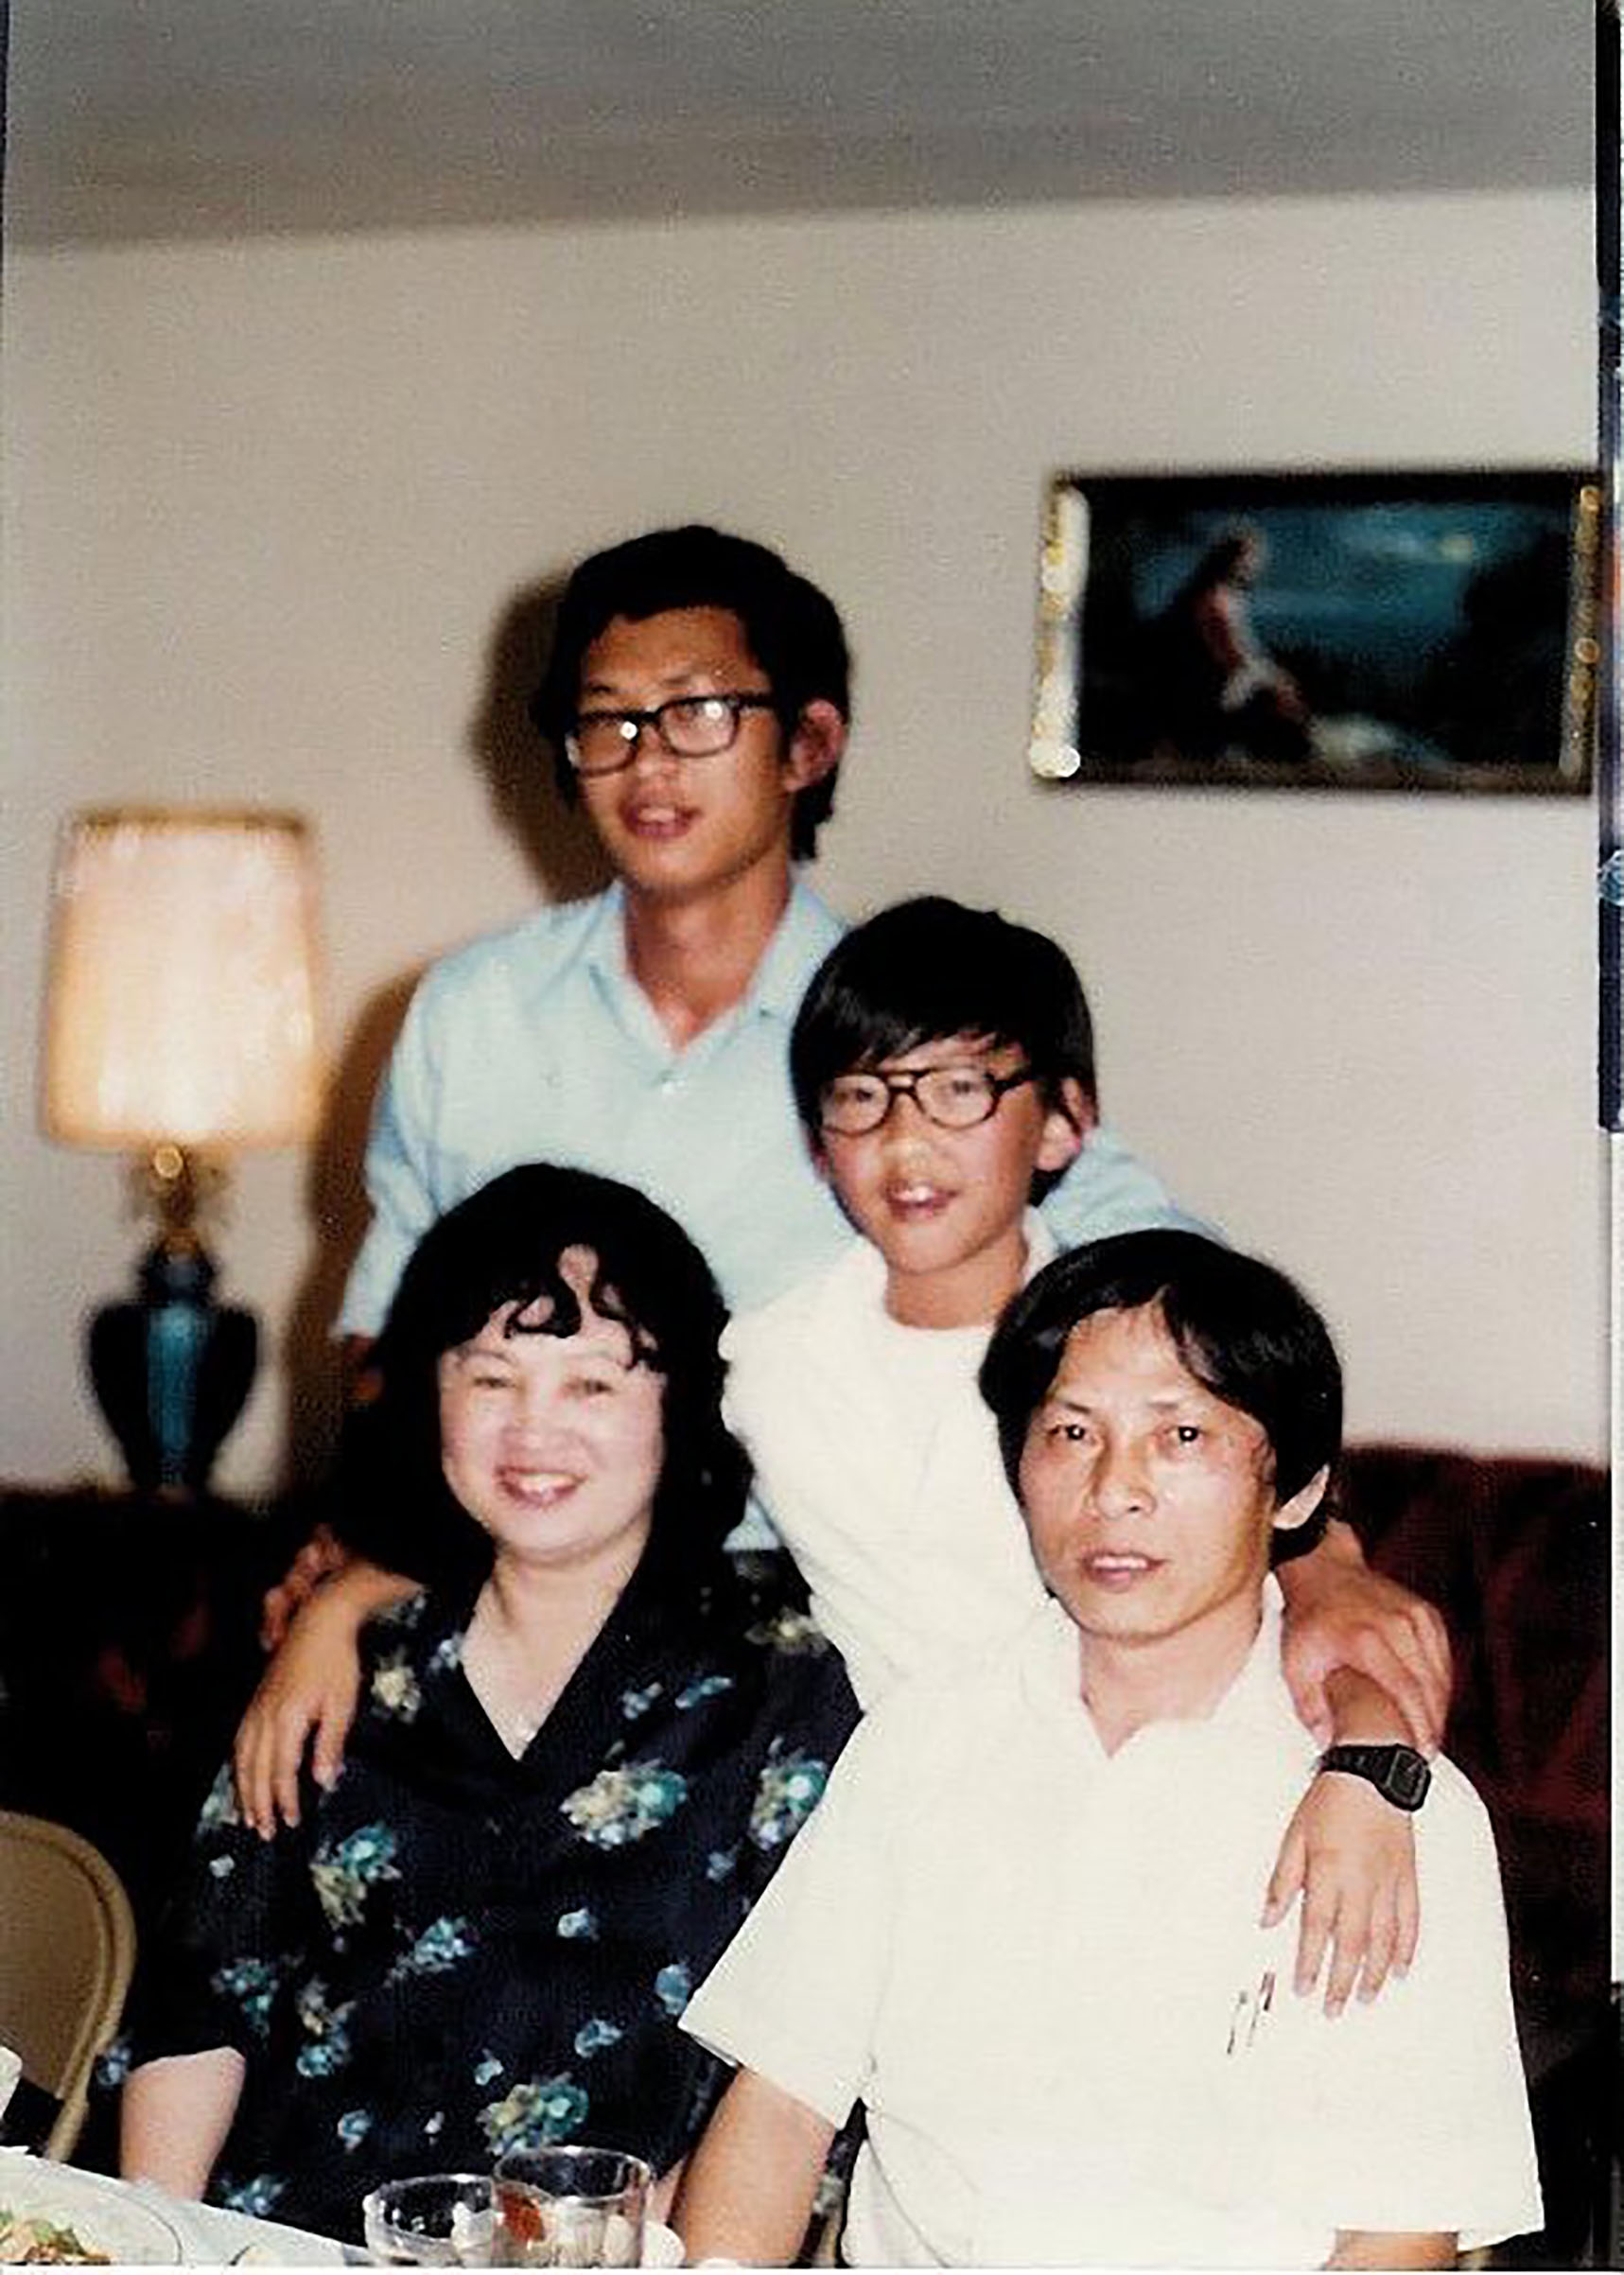 The Nguyen family, in the early 1980s in San Jose, Calif., where his parents owned the New Saigon Mini Market (Photographs Courtesy Viet Thanh Nguyen)